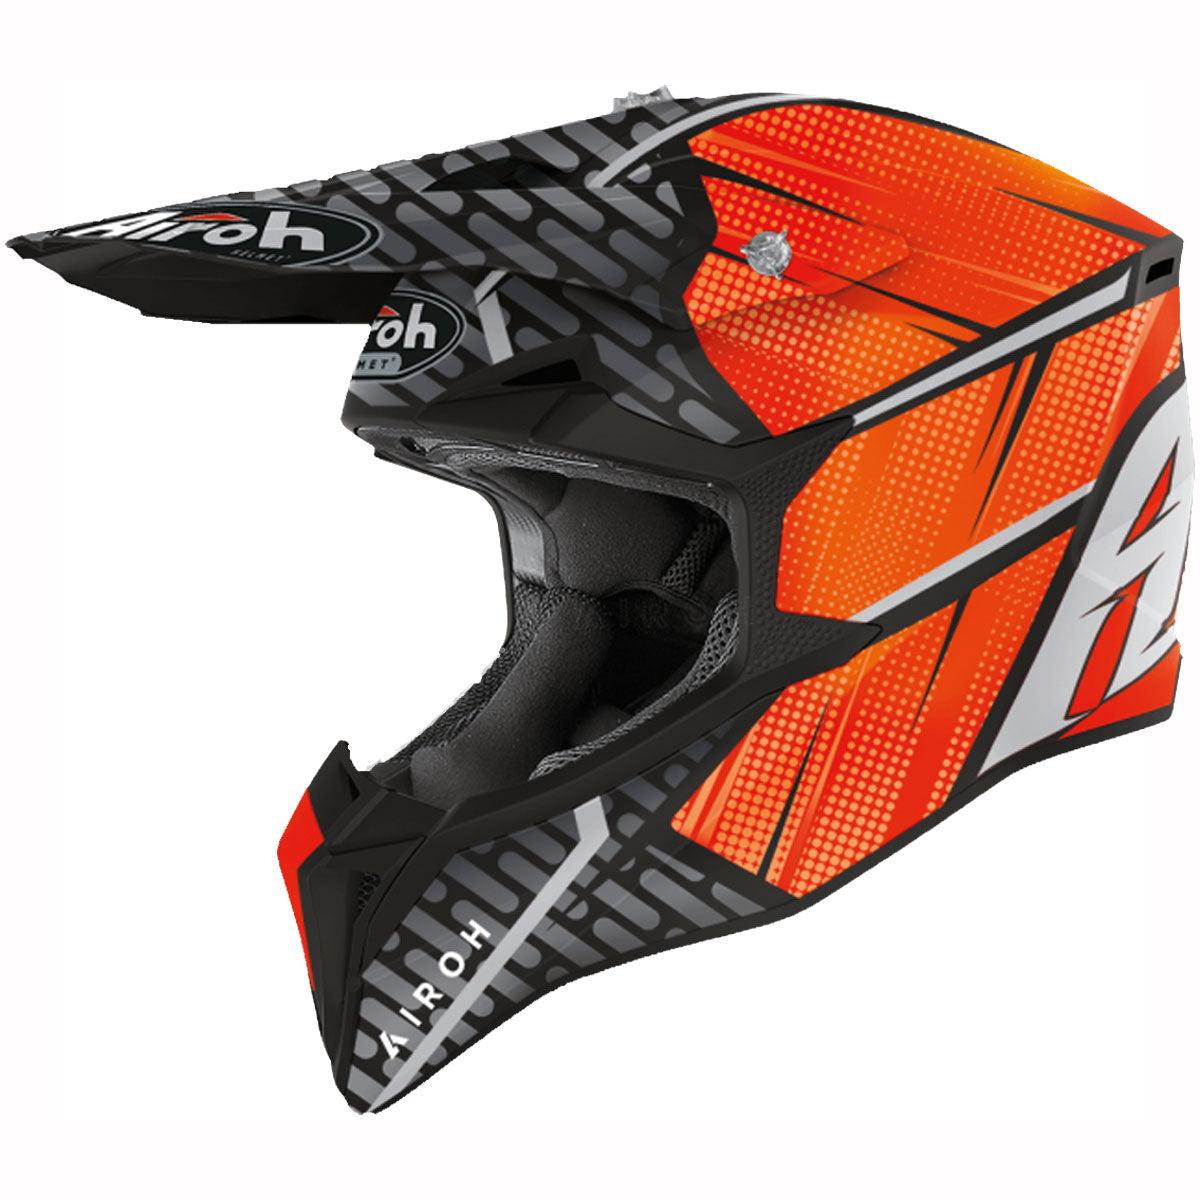 Airoh Wraap MX Helmet in the Idol graphic - Motocross helmets Airoh's MX helmet quality and finish are second to none. In fact, "quality", "beautiful", and "light" are the 3 most used words when describing the Airoh Wraap in reviews.